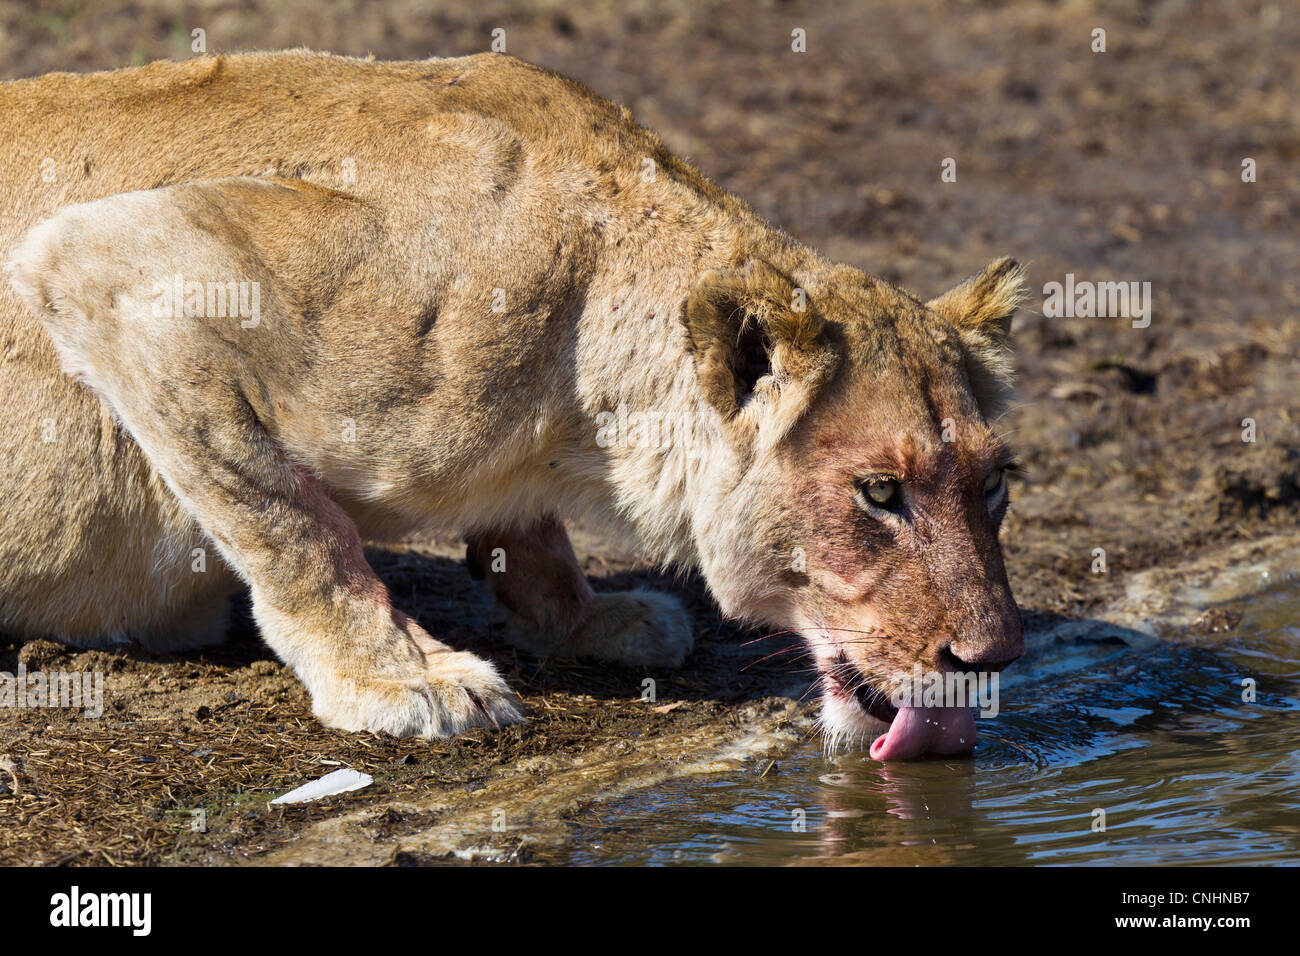 A female lion drinking water Stock Photo